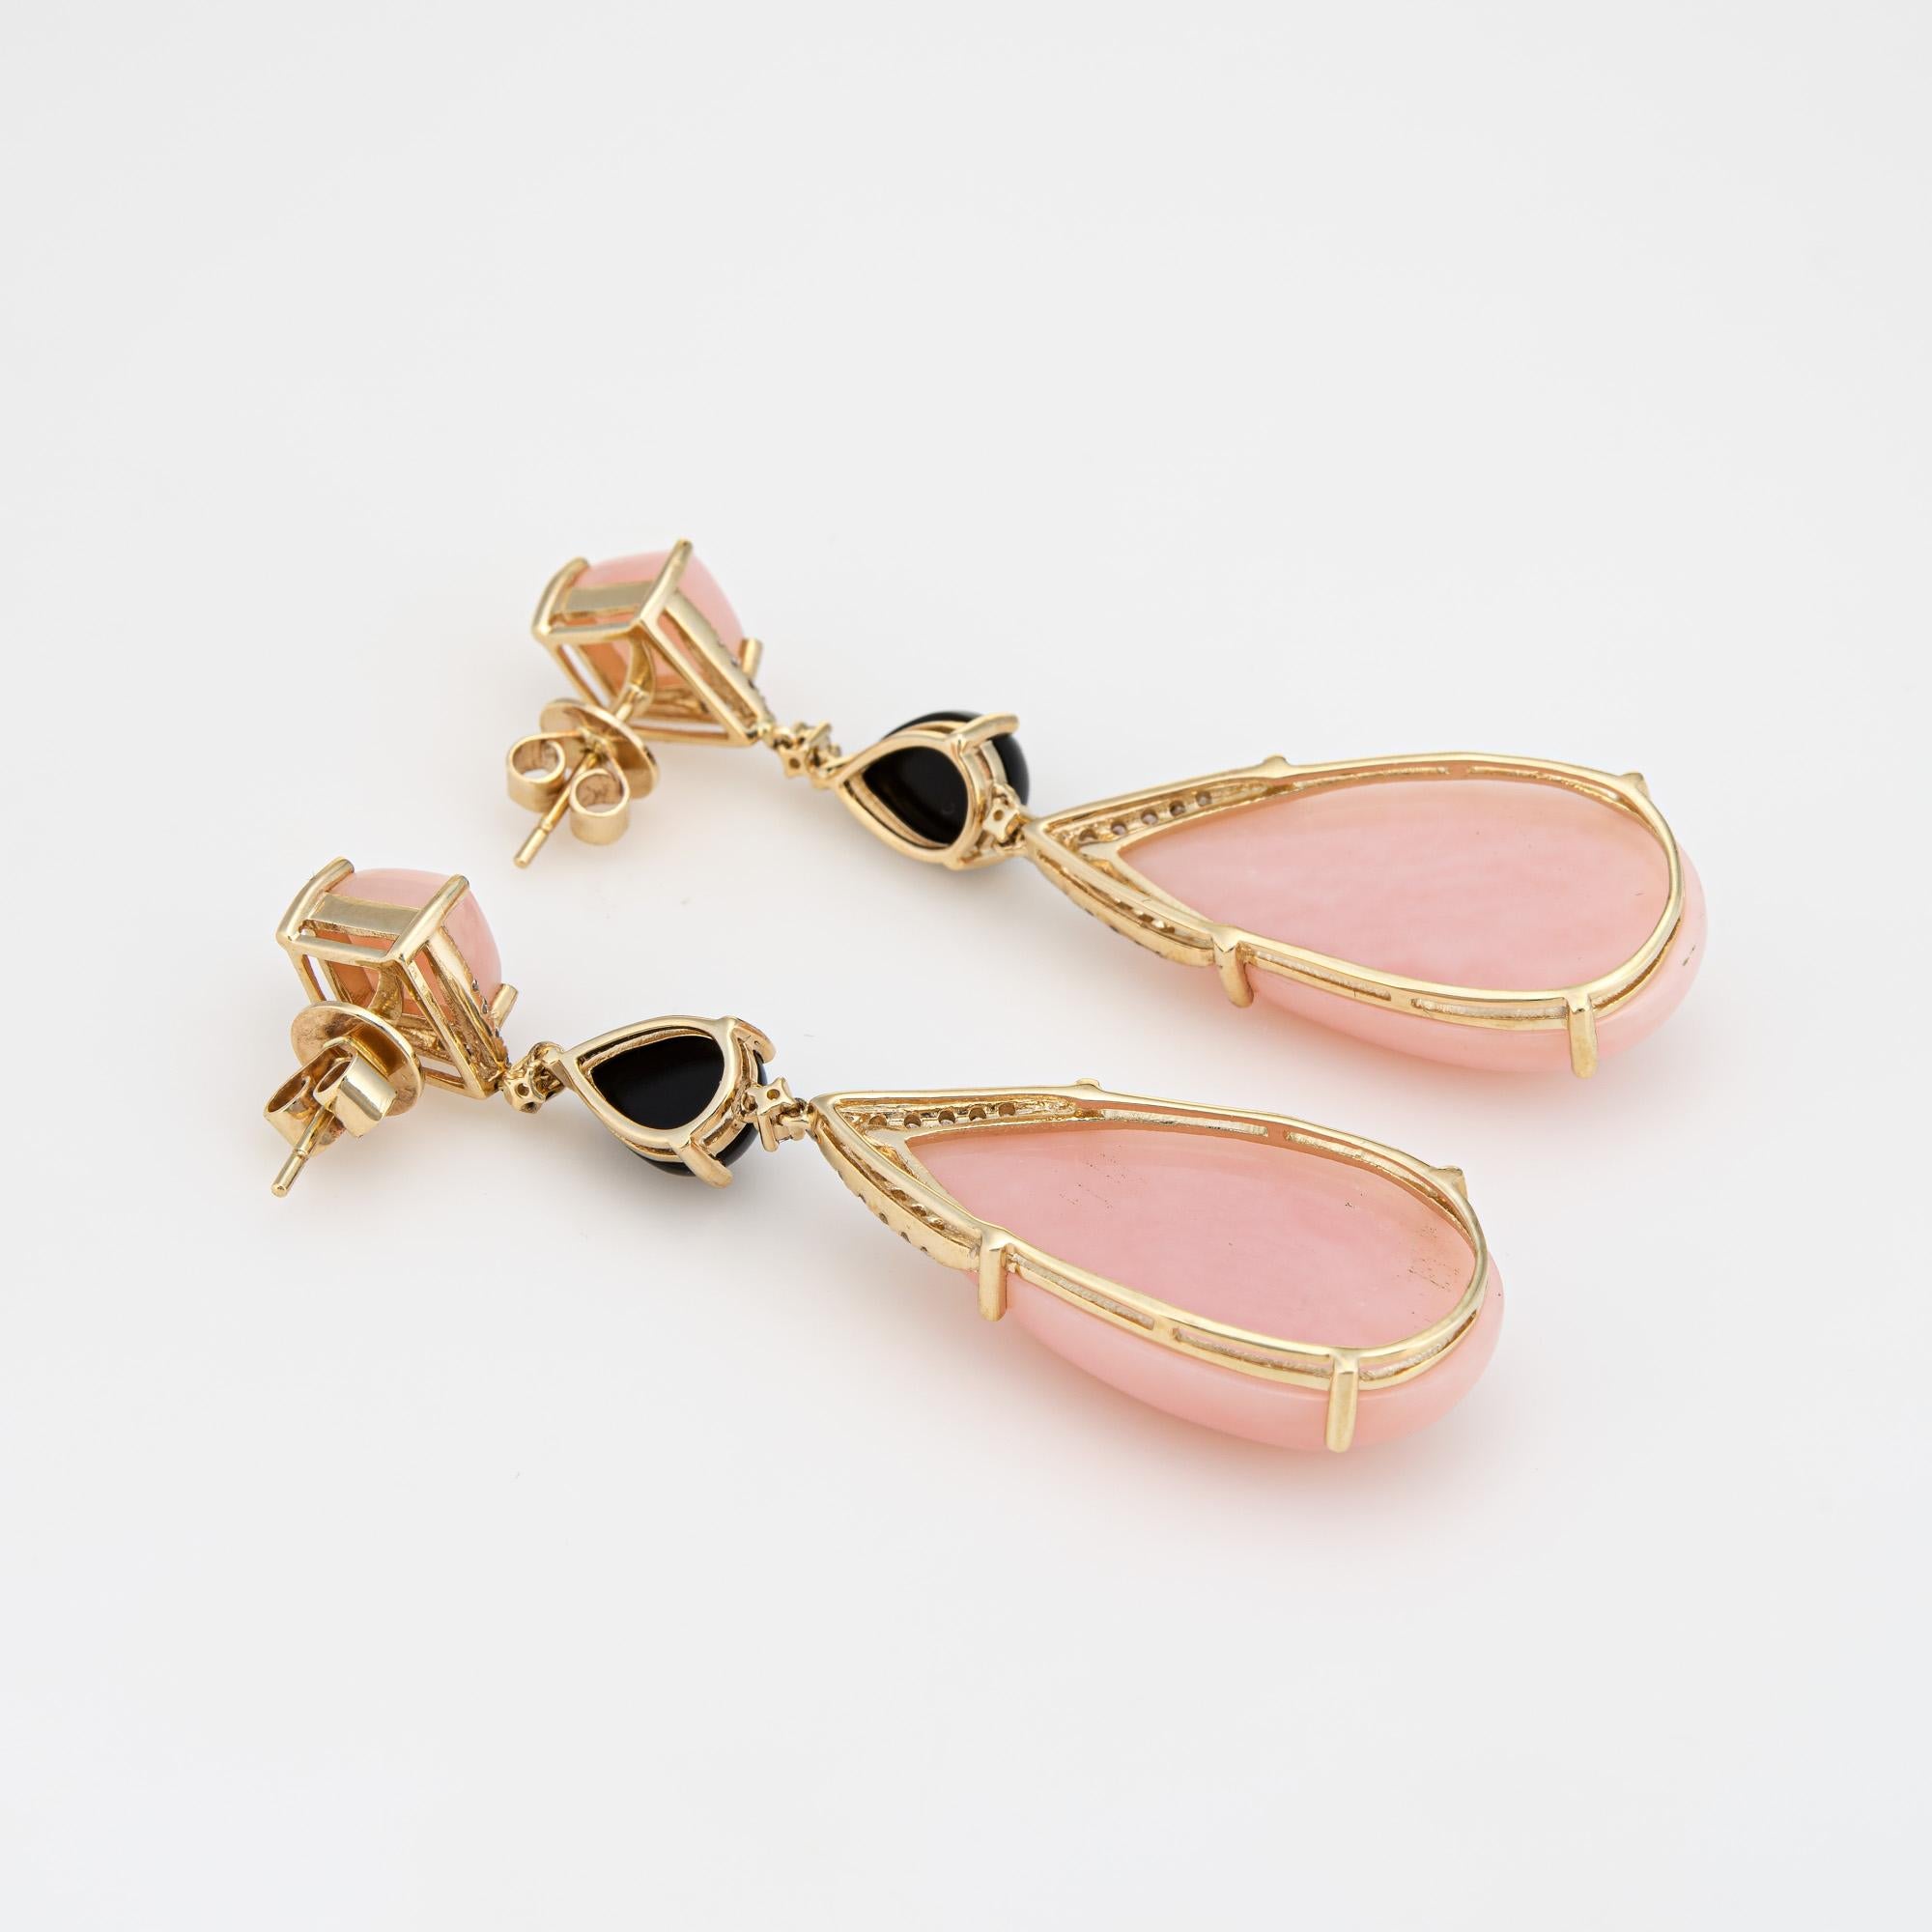 Stylish pair of contemporary pink opal, onyx & diamond drop earrings crated in 14k yellow gold. 

Pink opals measure 8mm (upper) and 26mm x 15mm. Onyx measures 8.5mm x 6.5mm. Diamonds total an estimated 0.20 carats (estimated at I-J color and SI2-I1